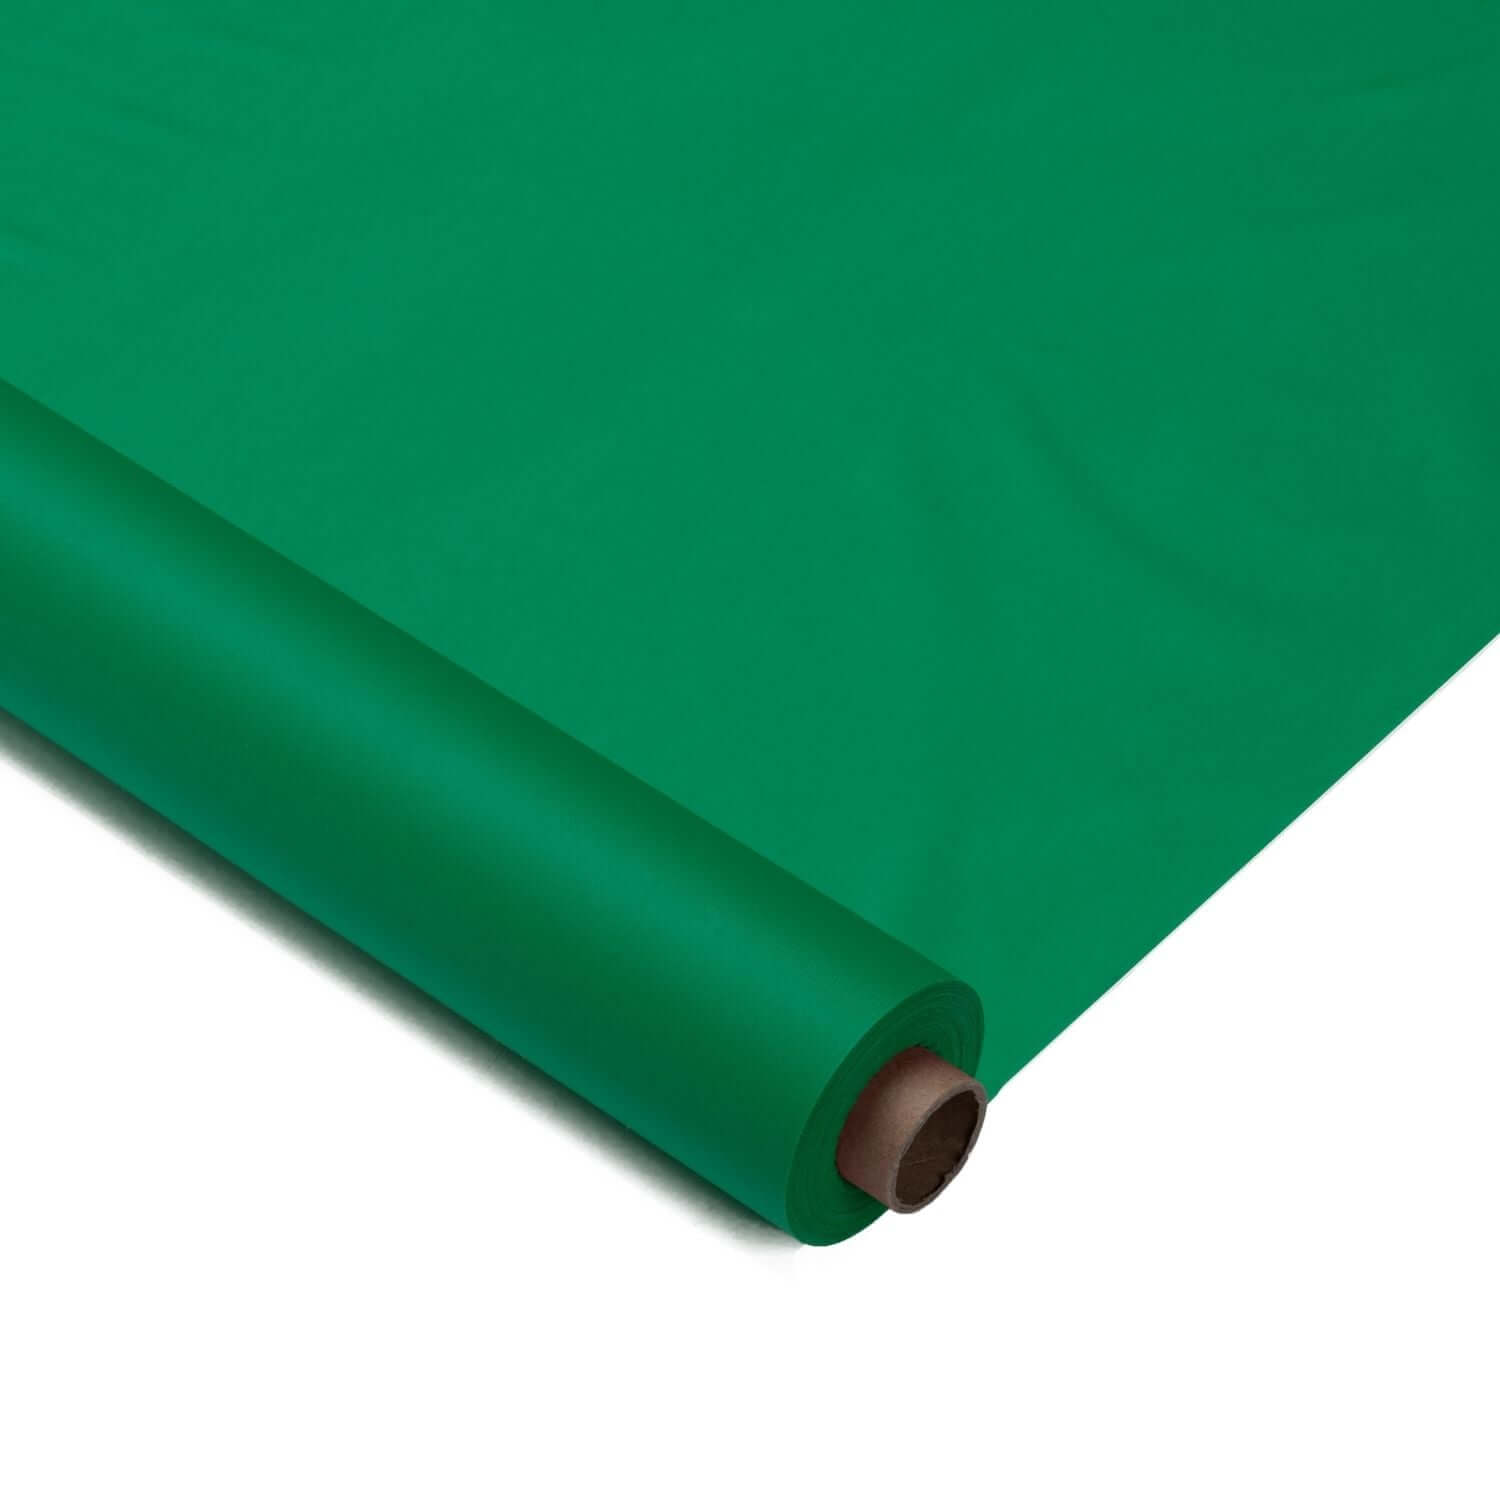 40 In. X 300 Ft. Premium Emerald Green Plastic Table Roll | 4 Pack - Yom Tov Settings